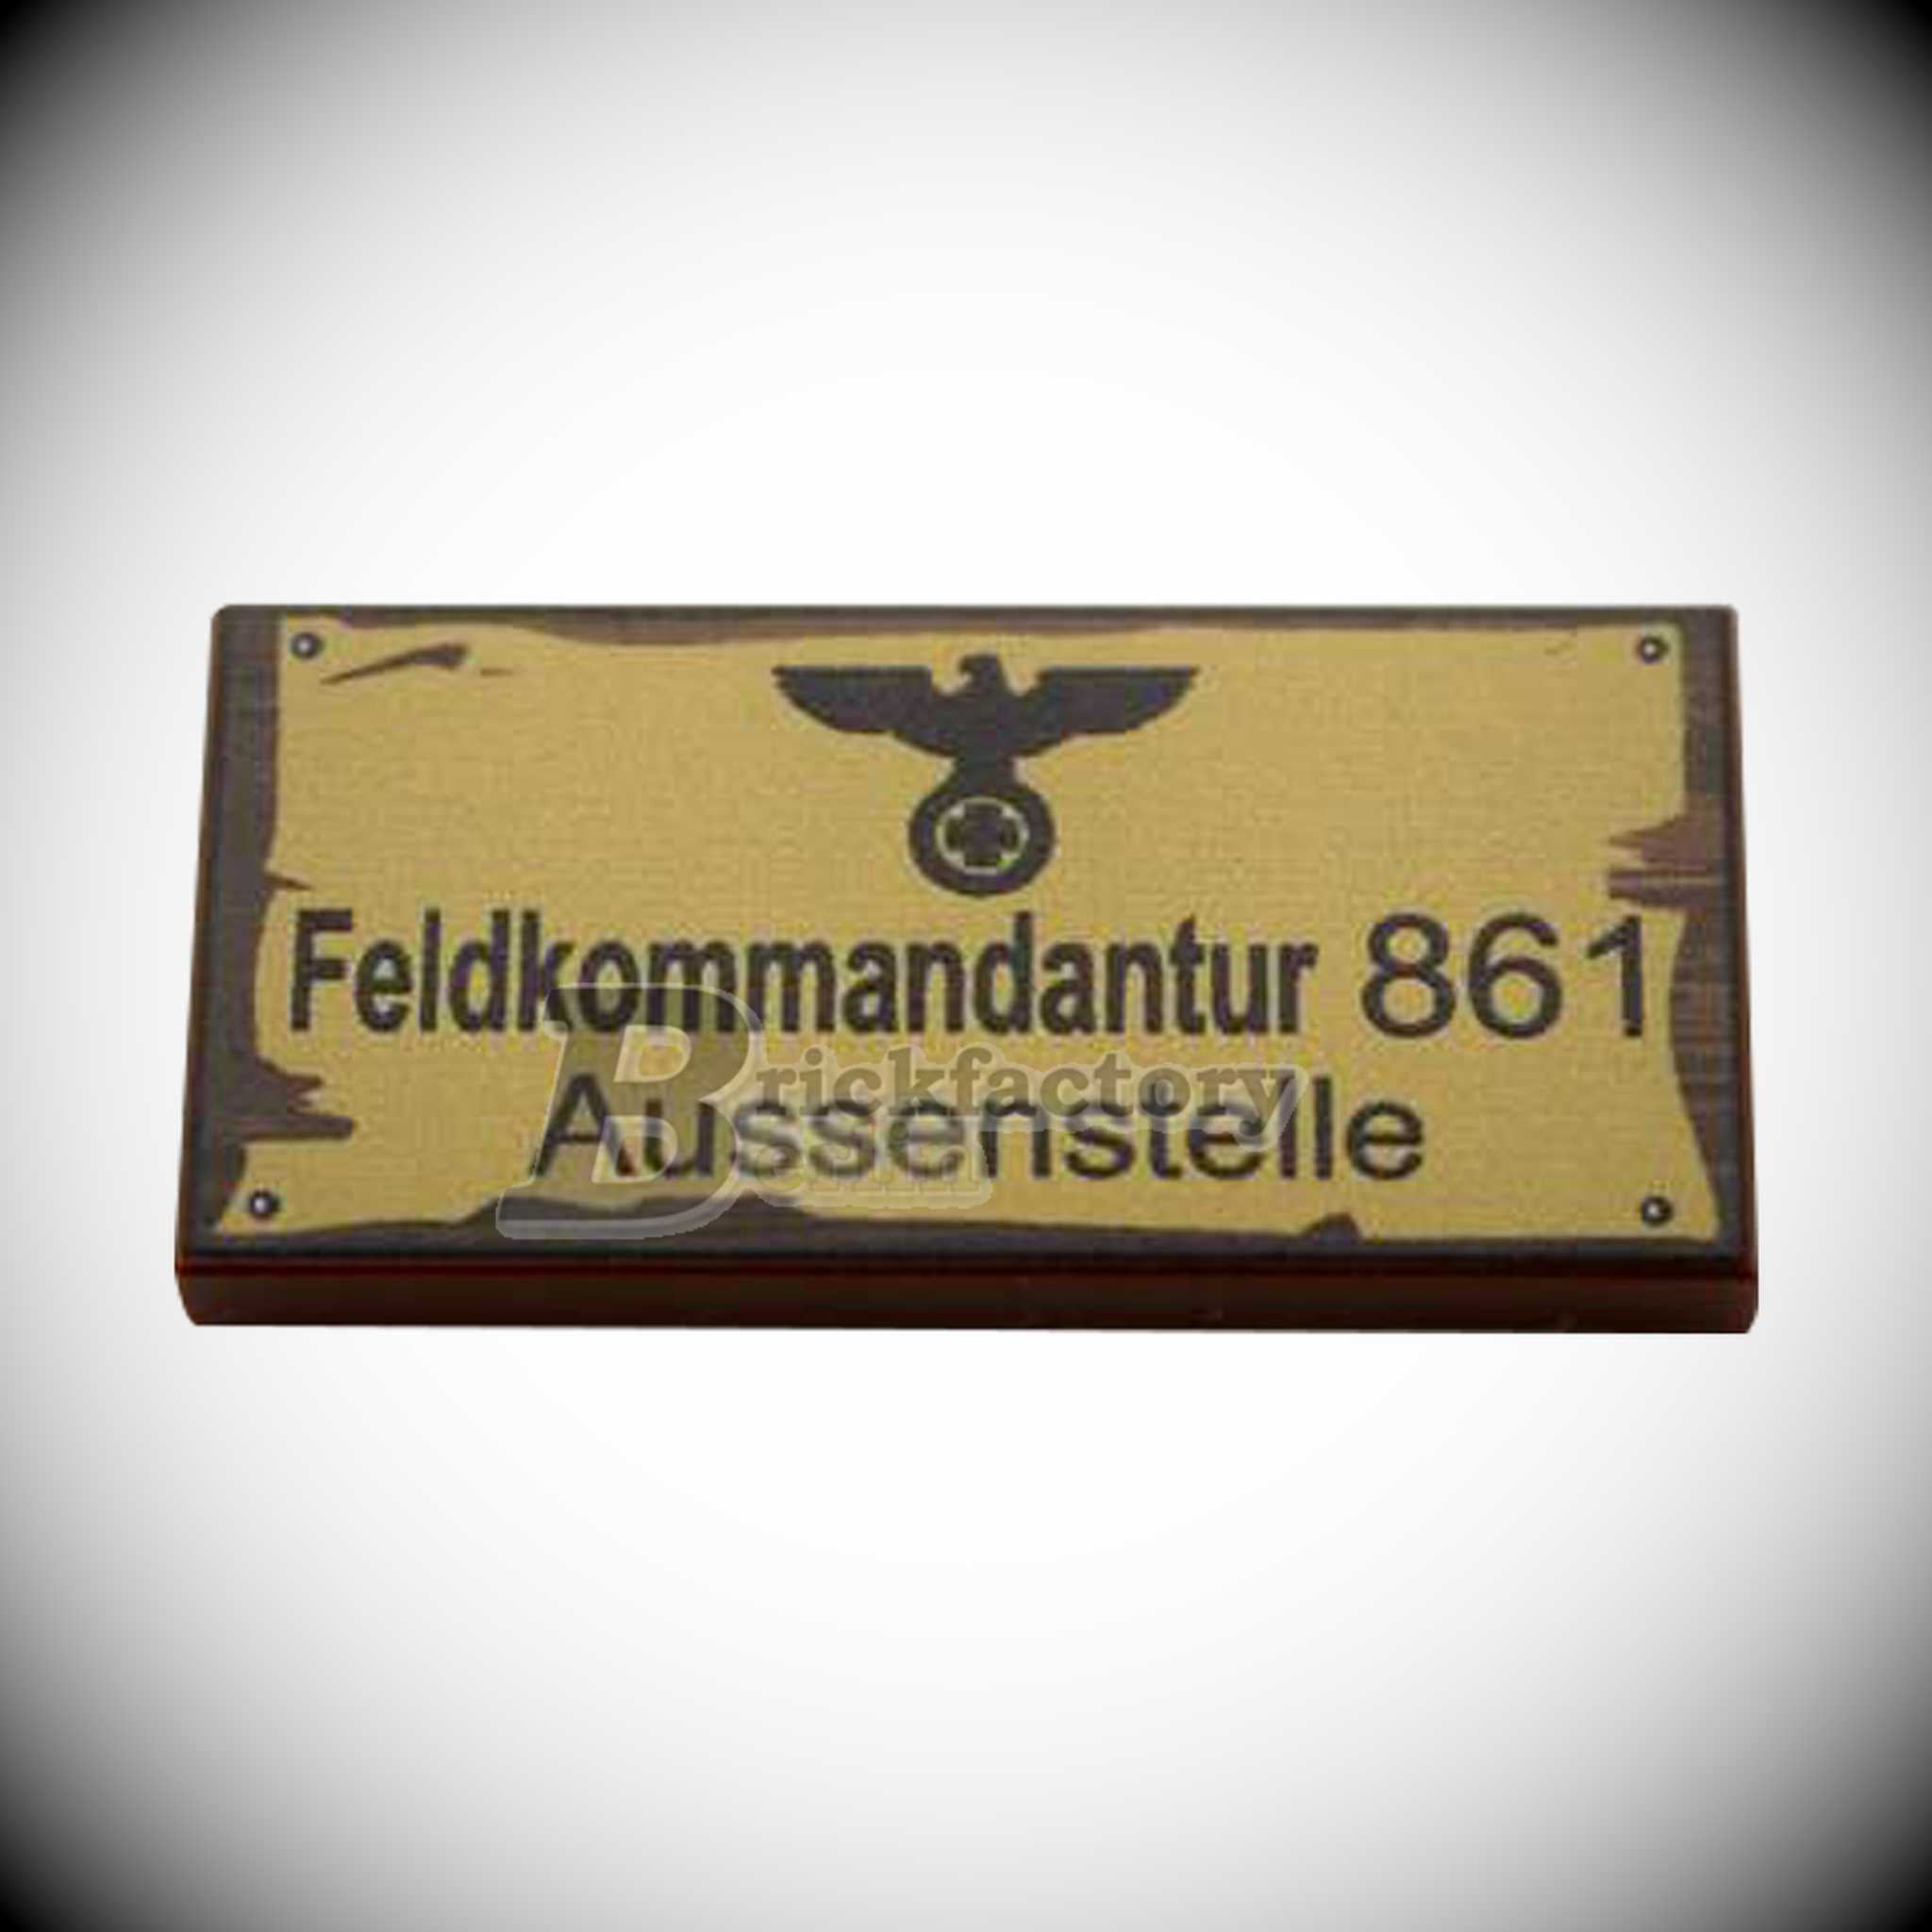 BF-0467A - Field Command II (Color: Reddish-Brown, LEGO® Printed Tile 2x4)